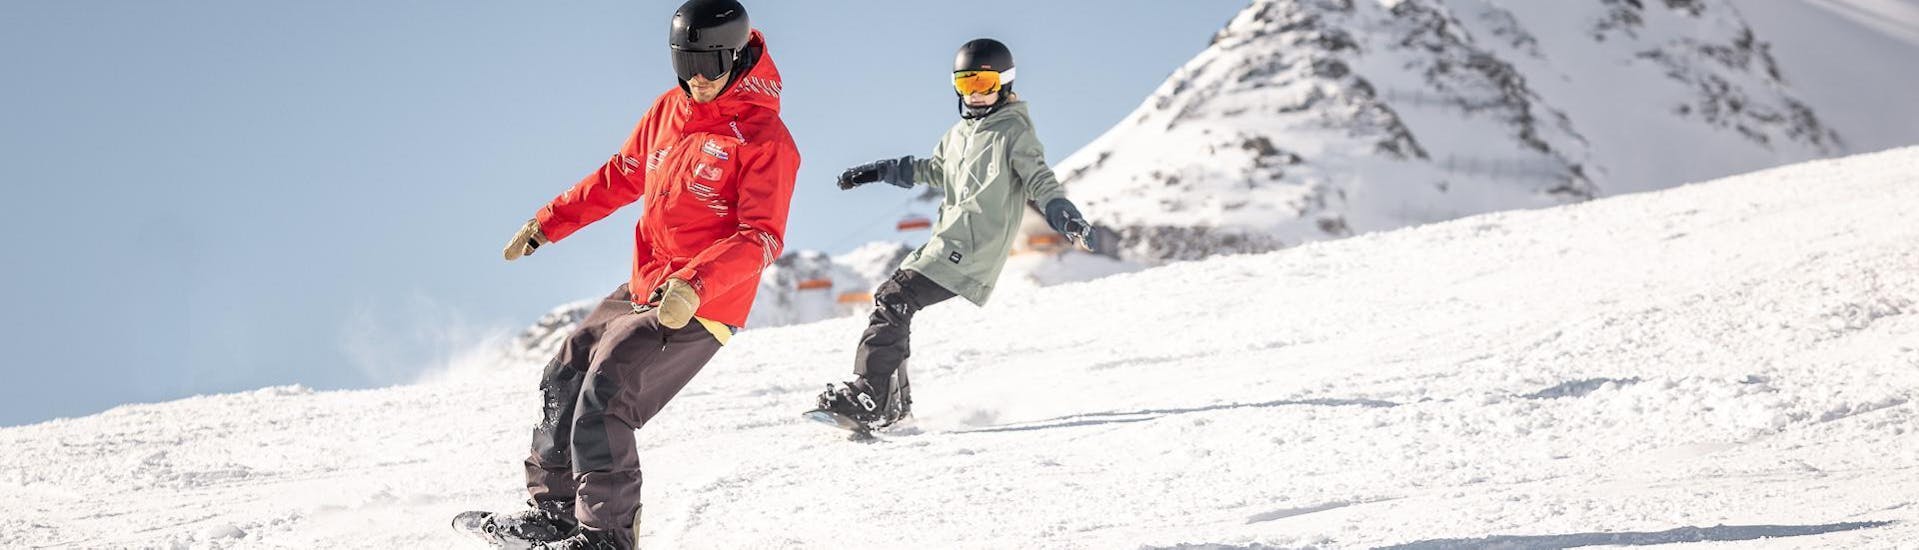 A snowboarder is practicing his front and backside turns during his Private Snowboarding Lessons for Adults - All Levels with the ski school Ski- und Snowboardschule Vacancia.